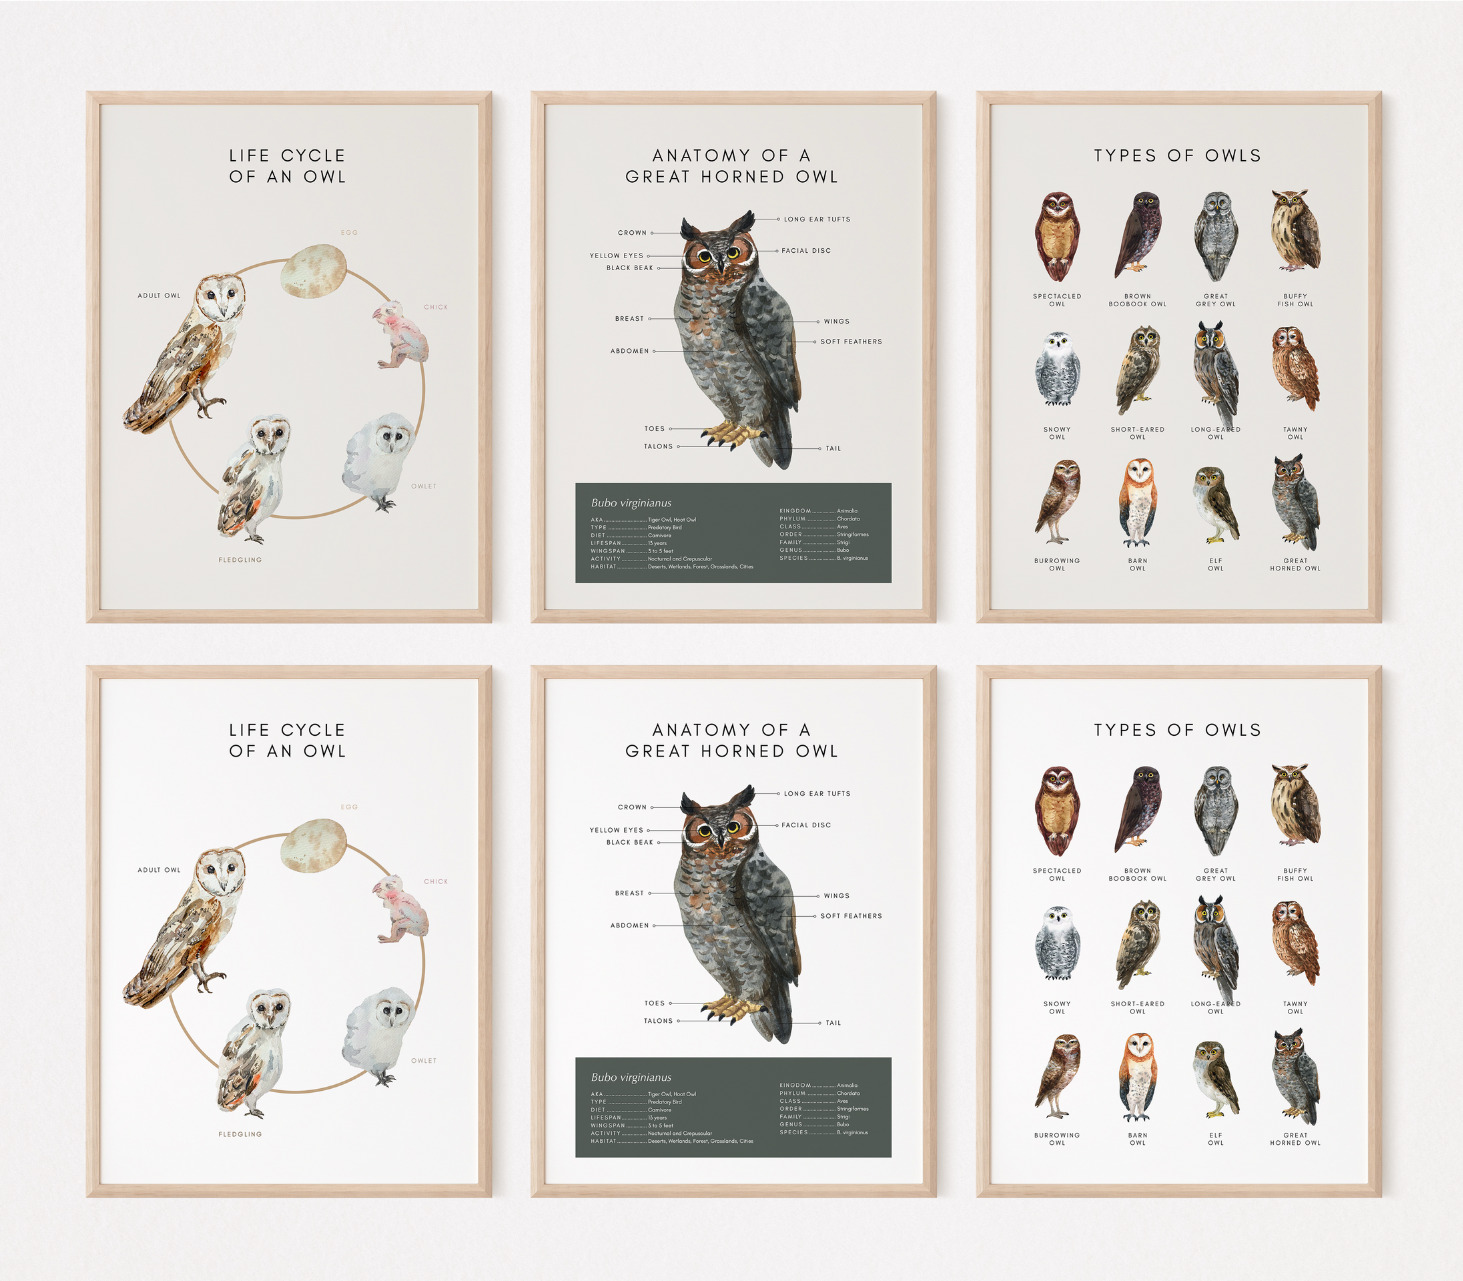 Educational Posters - The Owl Life Cycle, The Great Horned Owl, and Types of Owls